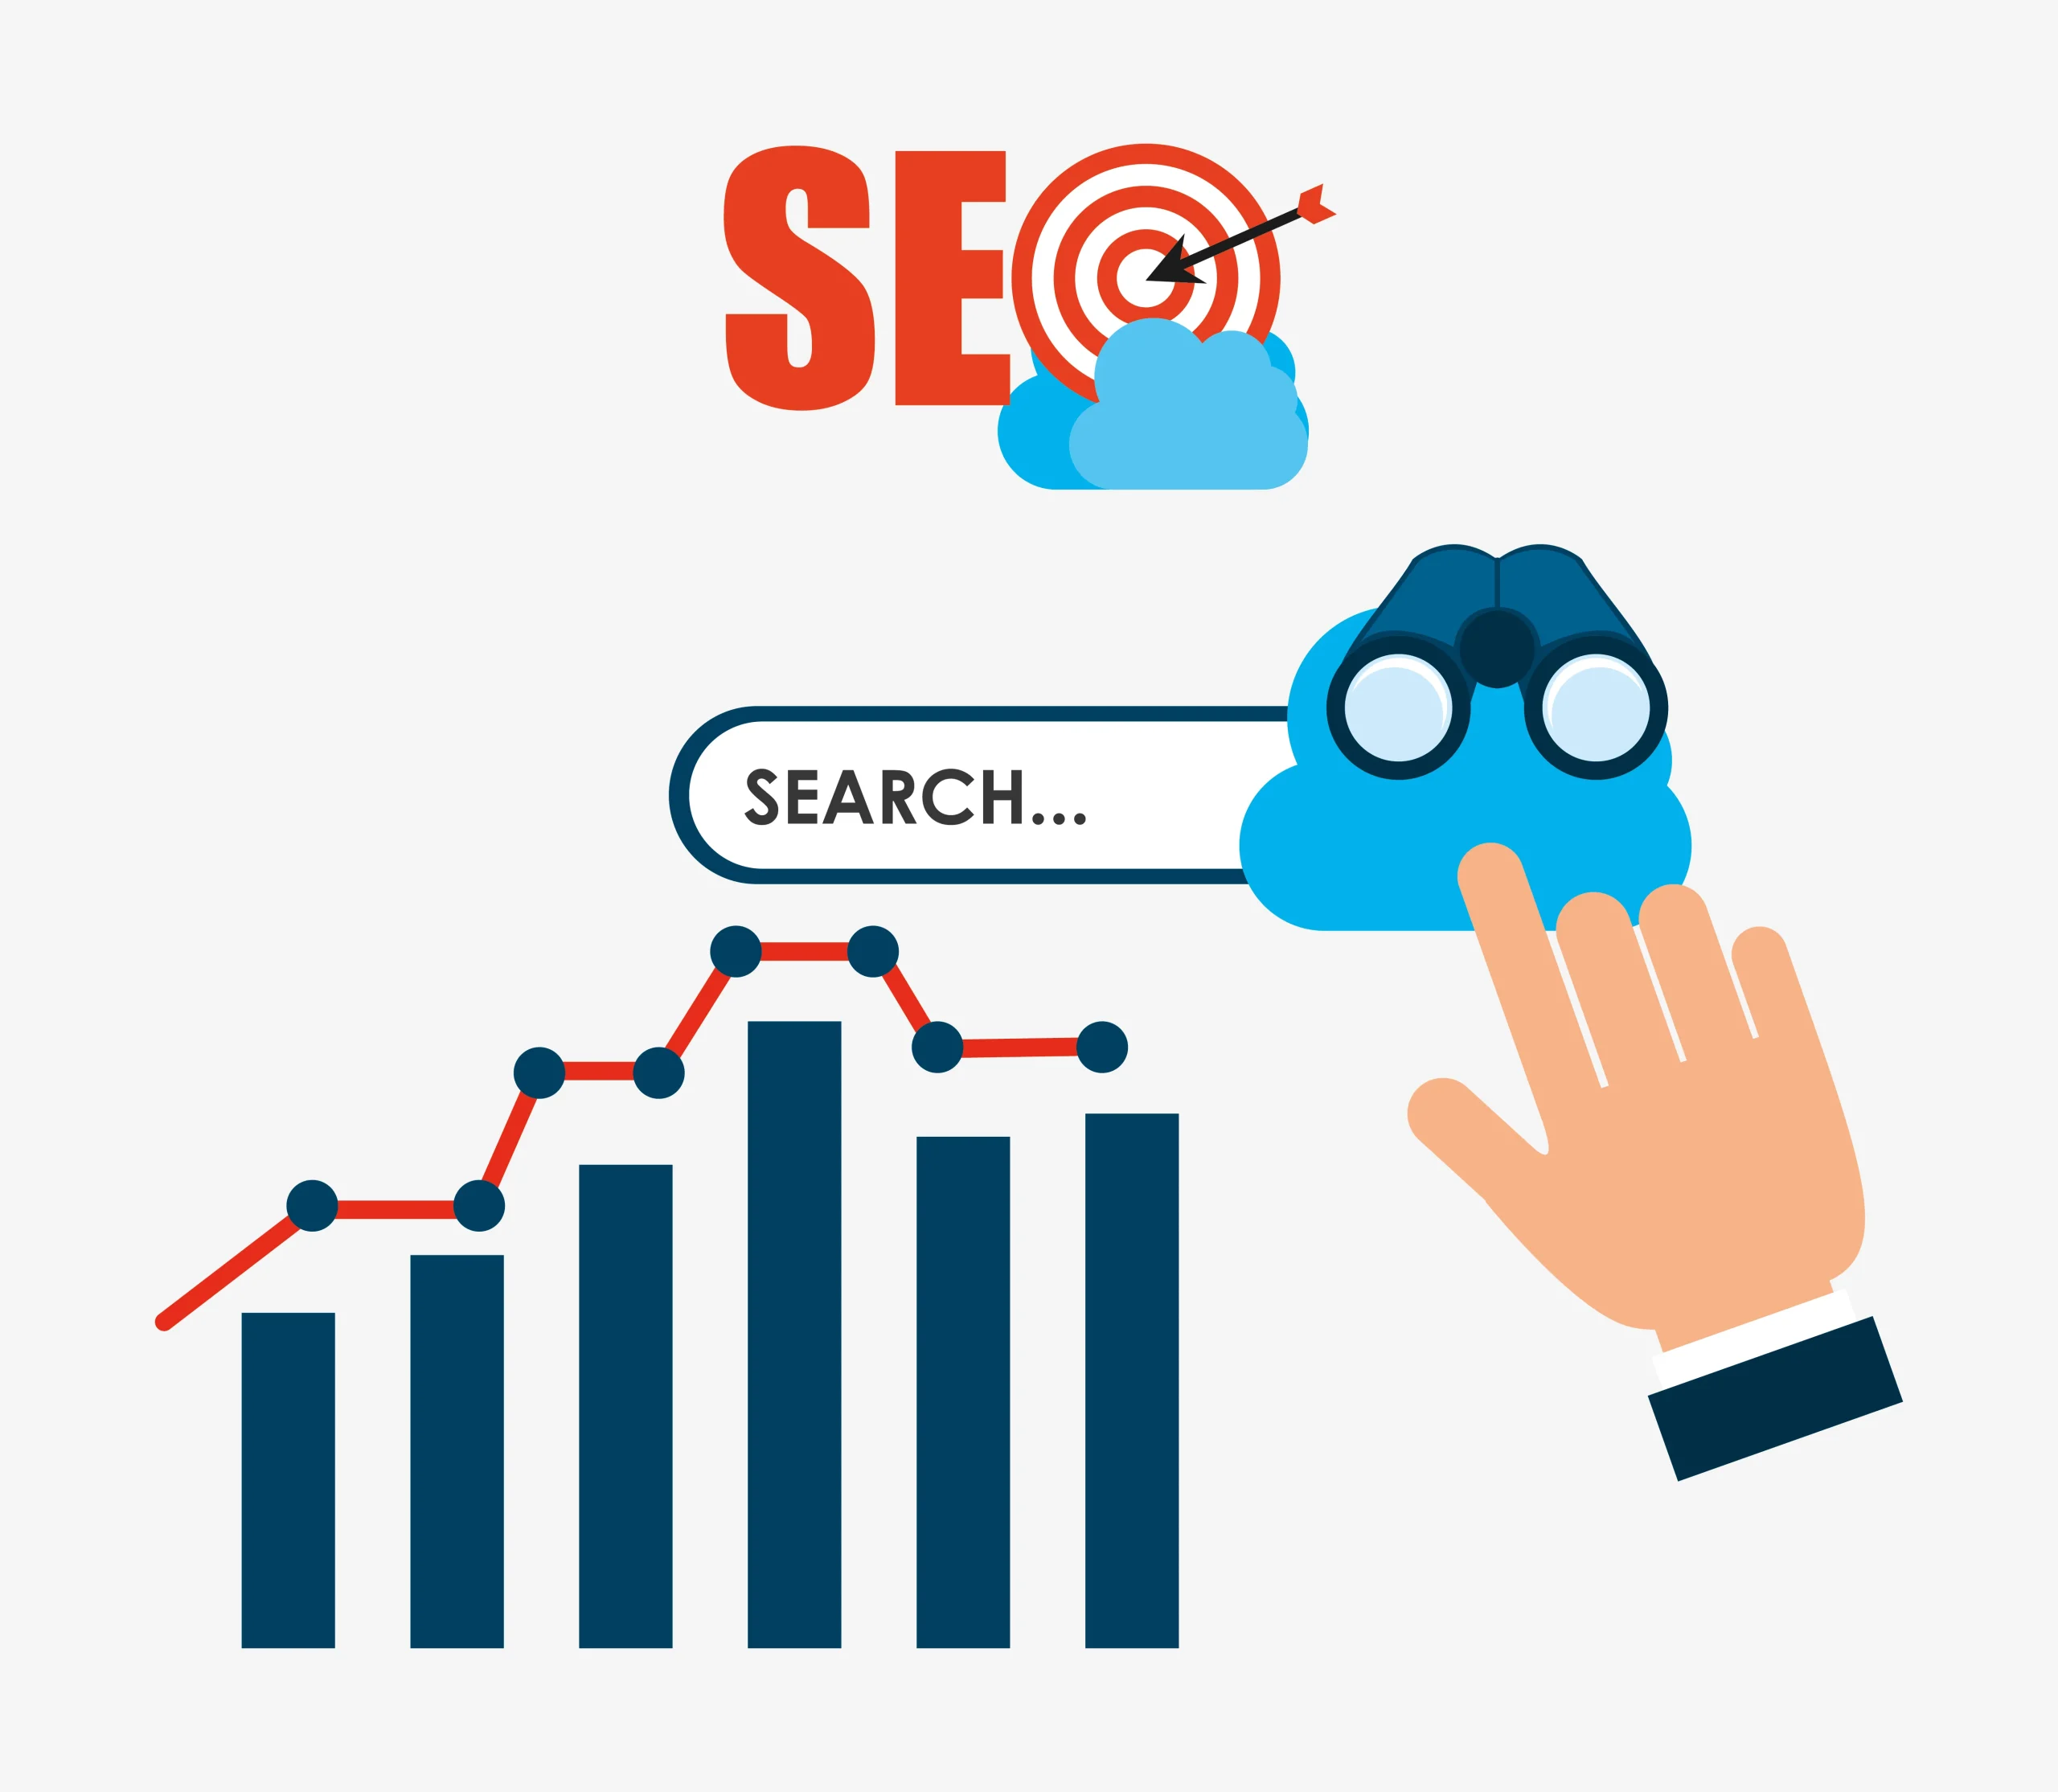 You are currently viewing Significance of Search Engine Optimization (SEO).